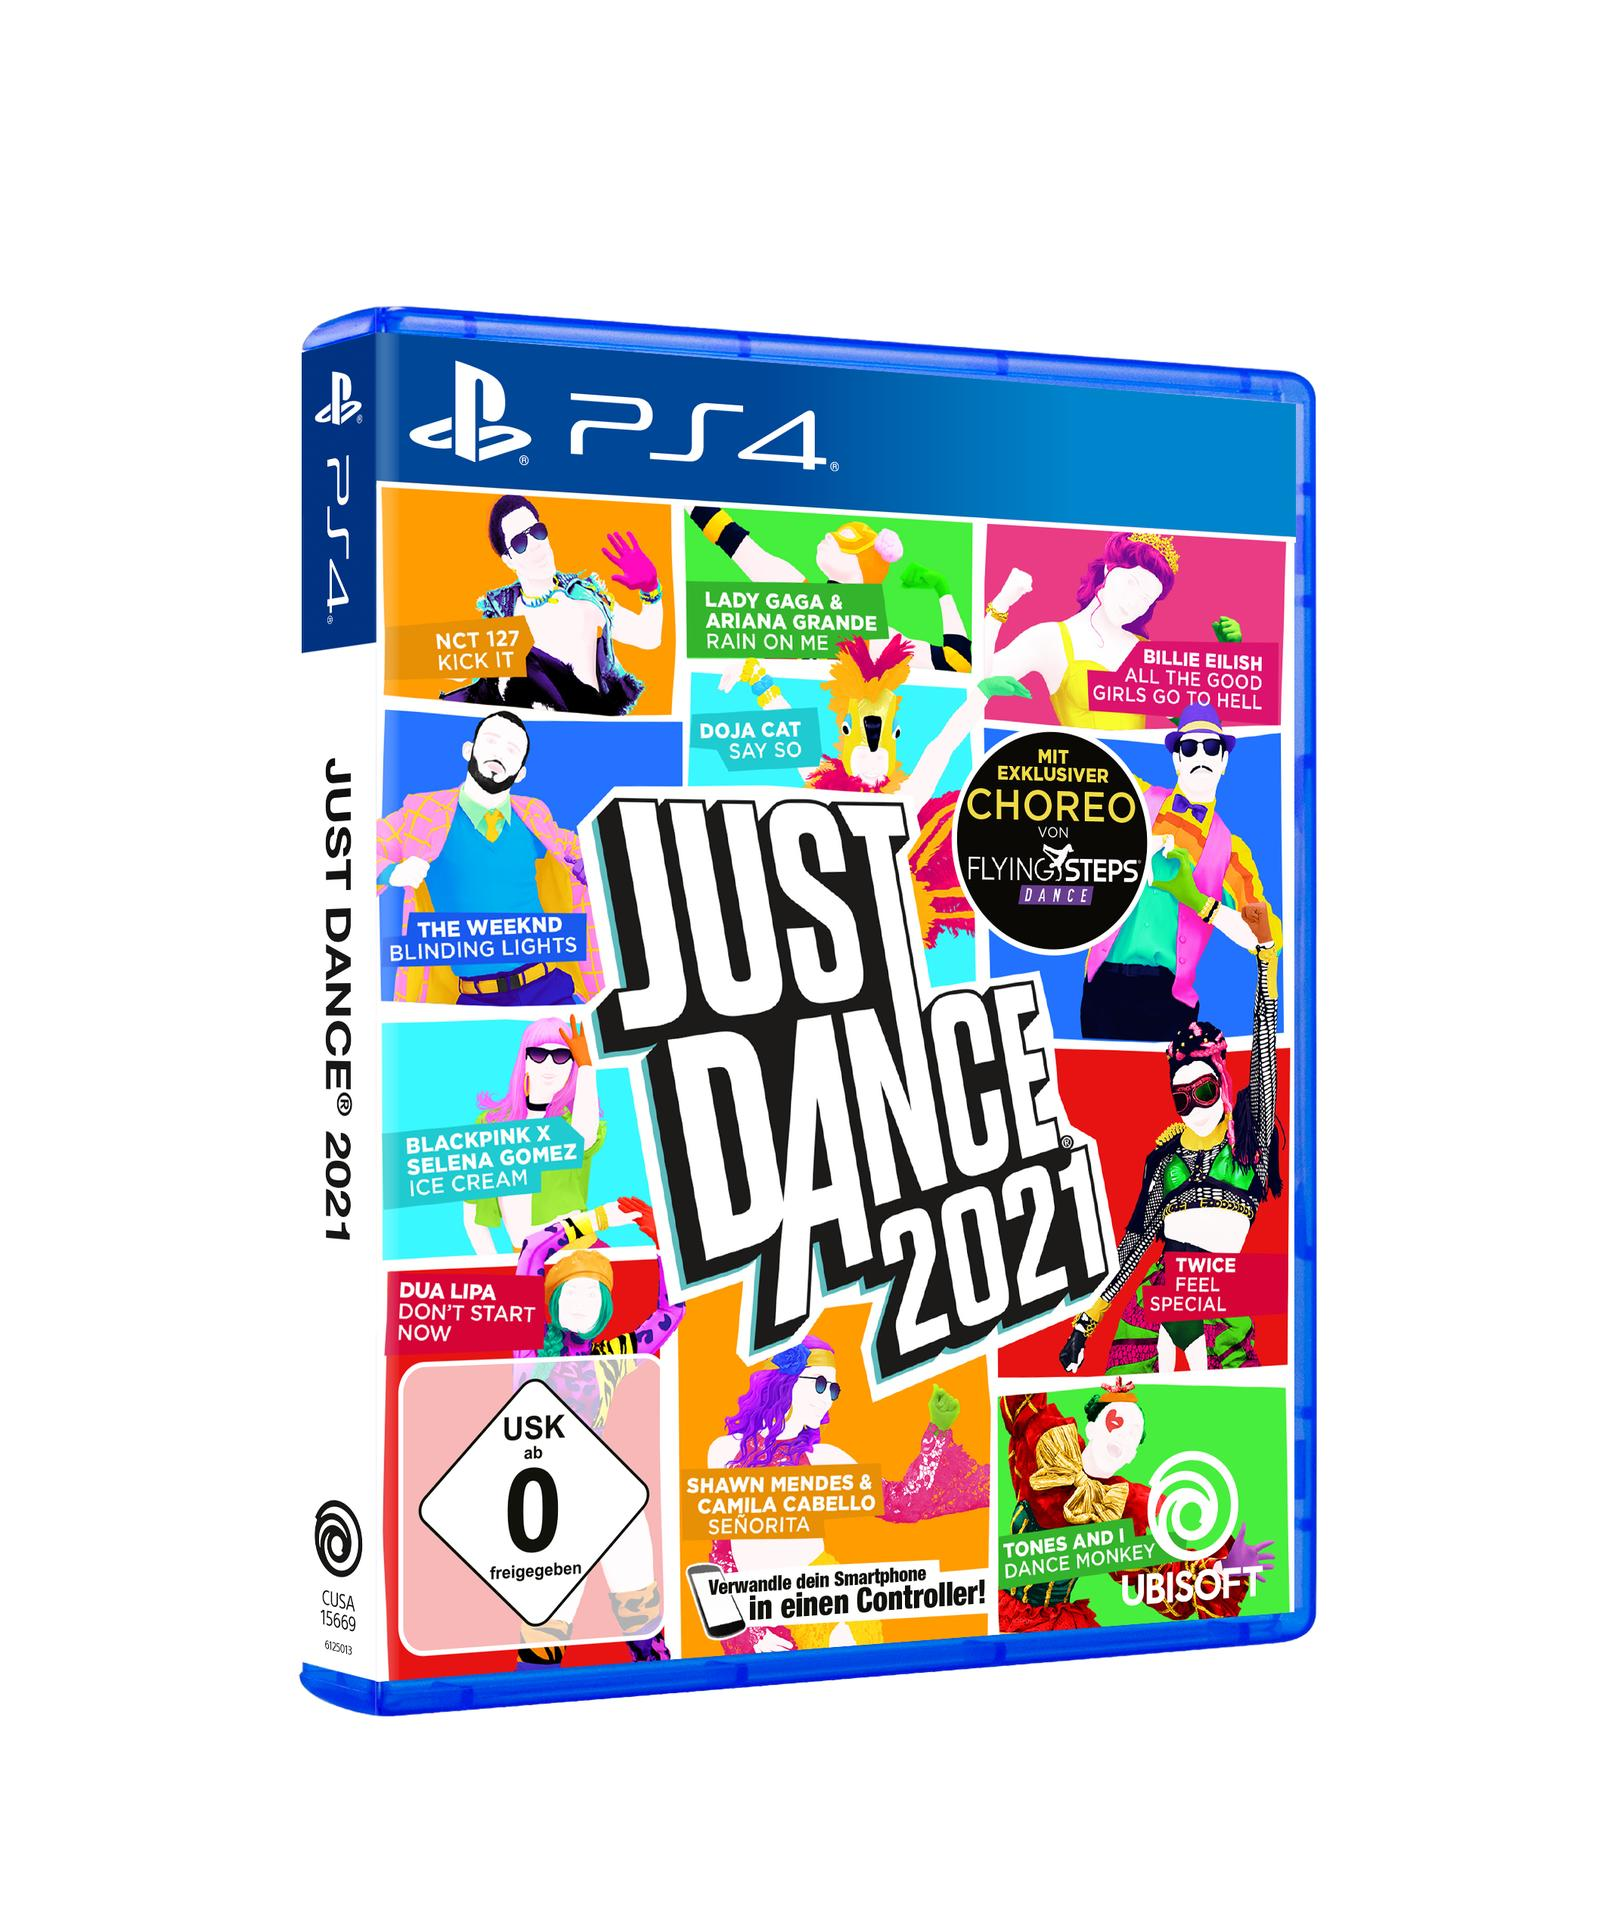 PS4 JUST DANCE 2021 - [PlayStation 4